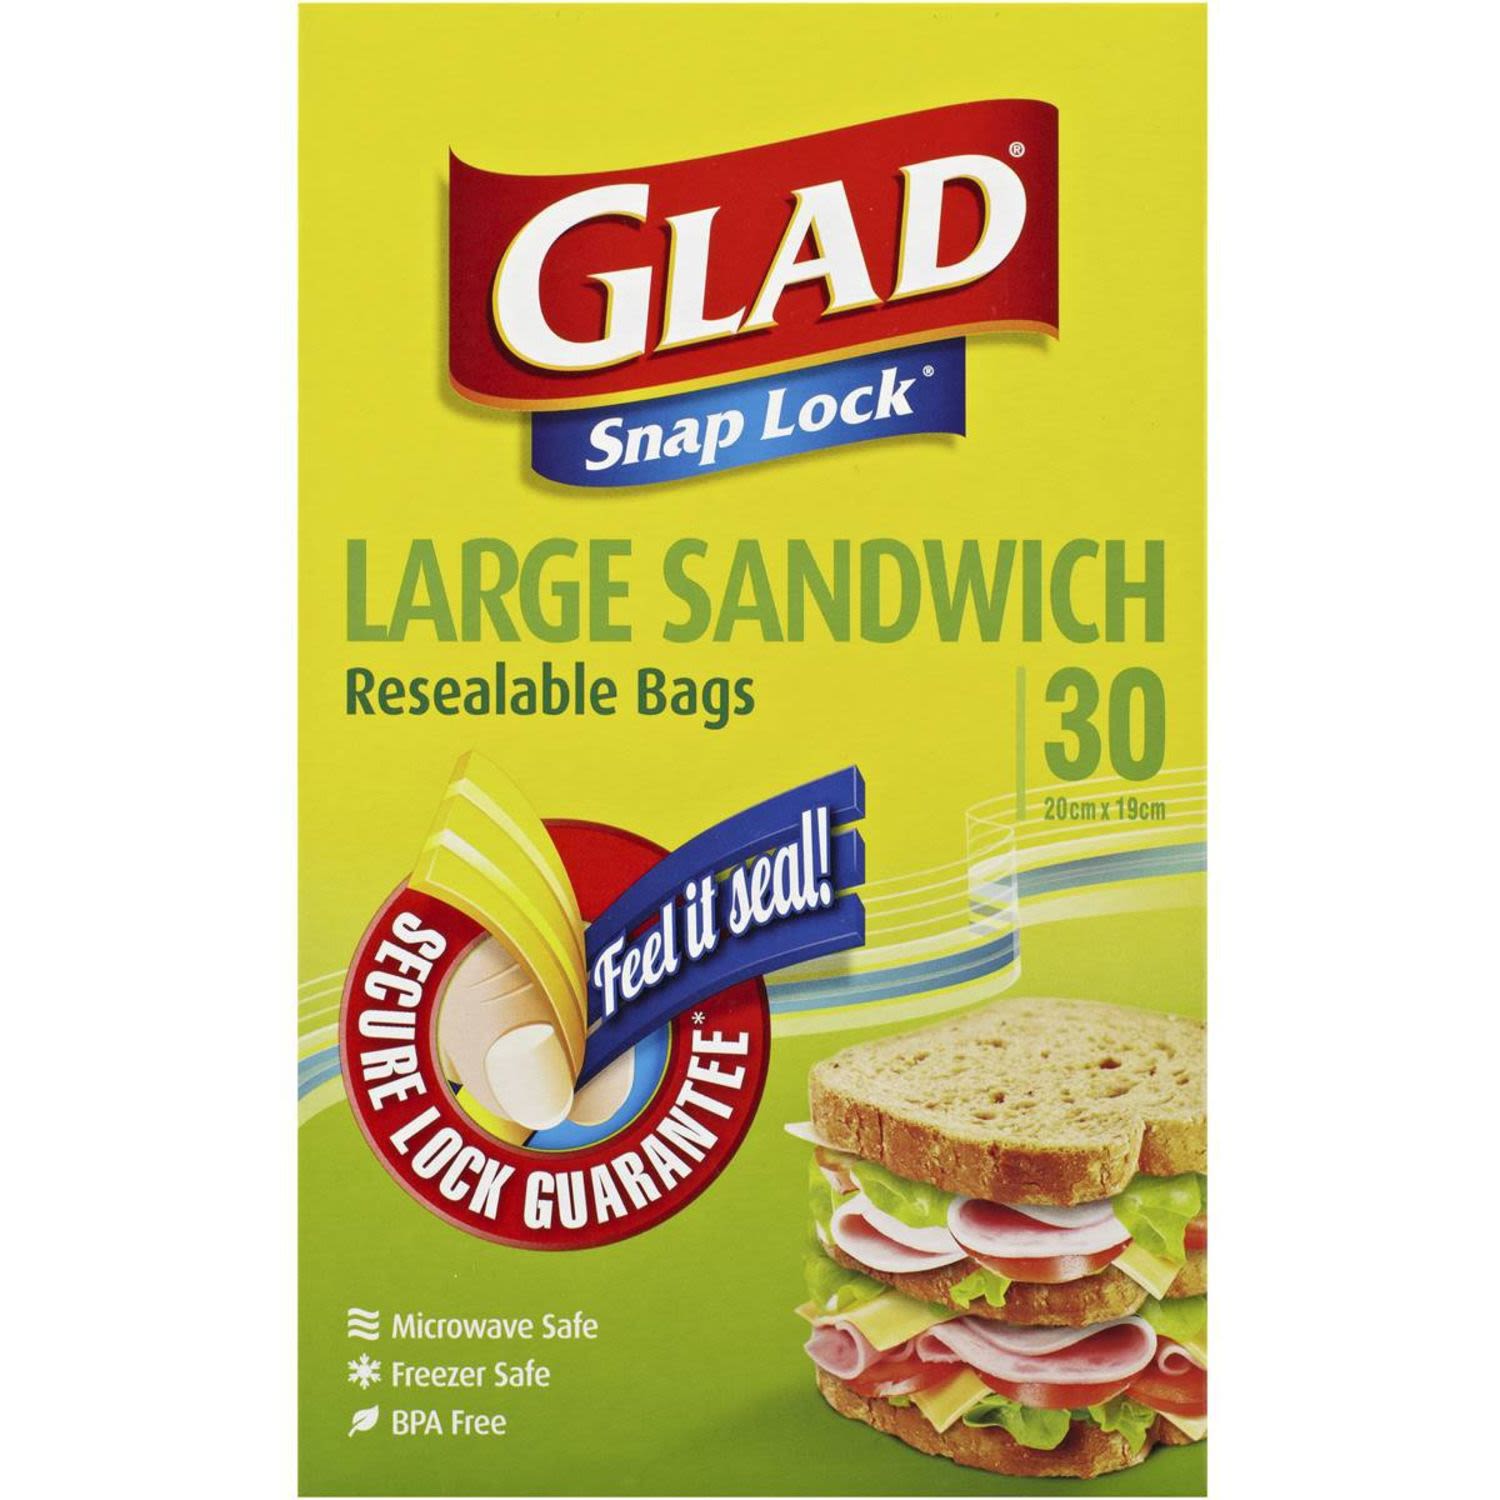 Glad Snap Lock Resealable Large Sandwich Bags, 30 Each